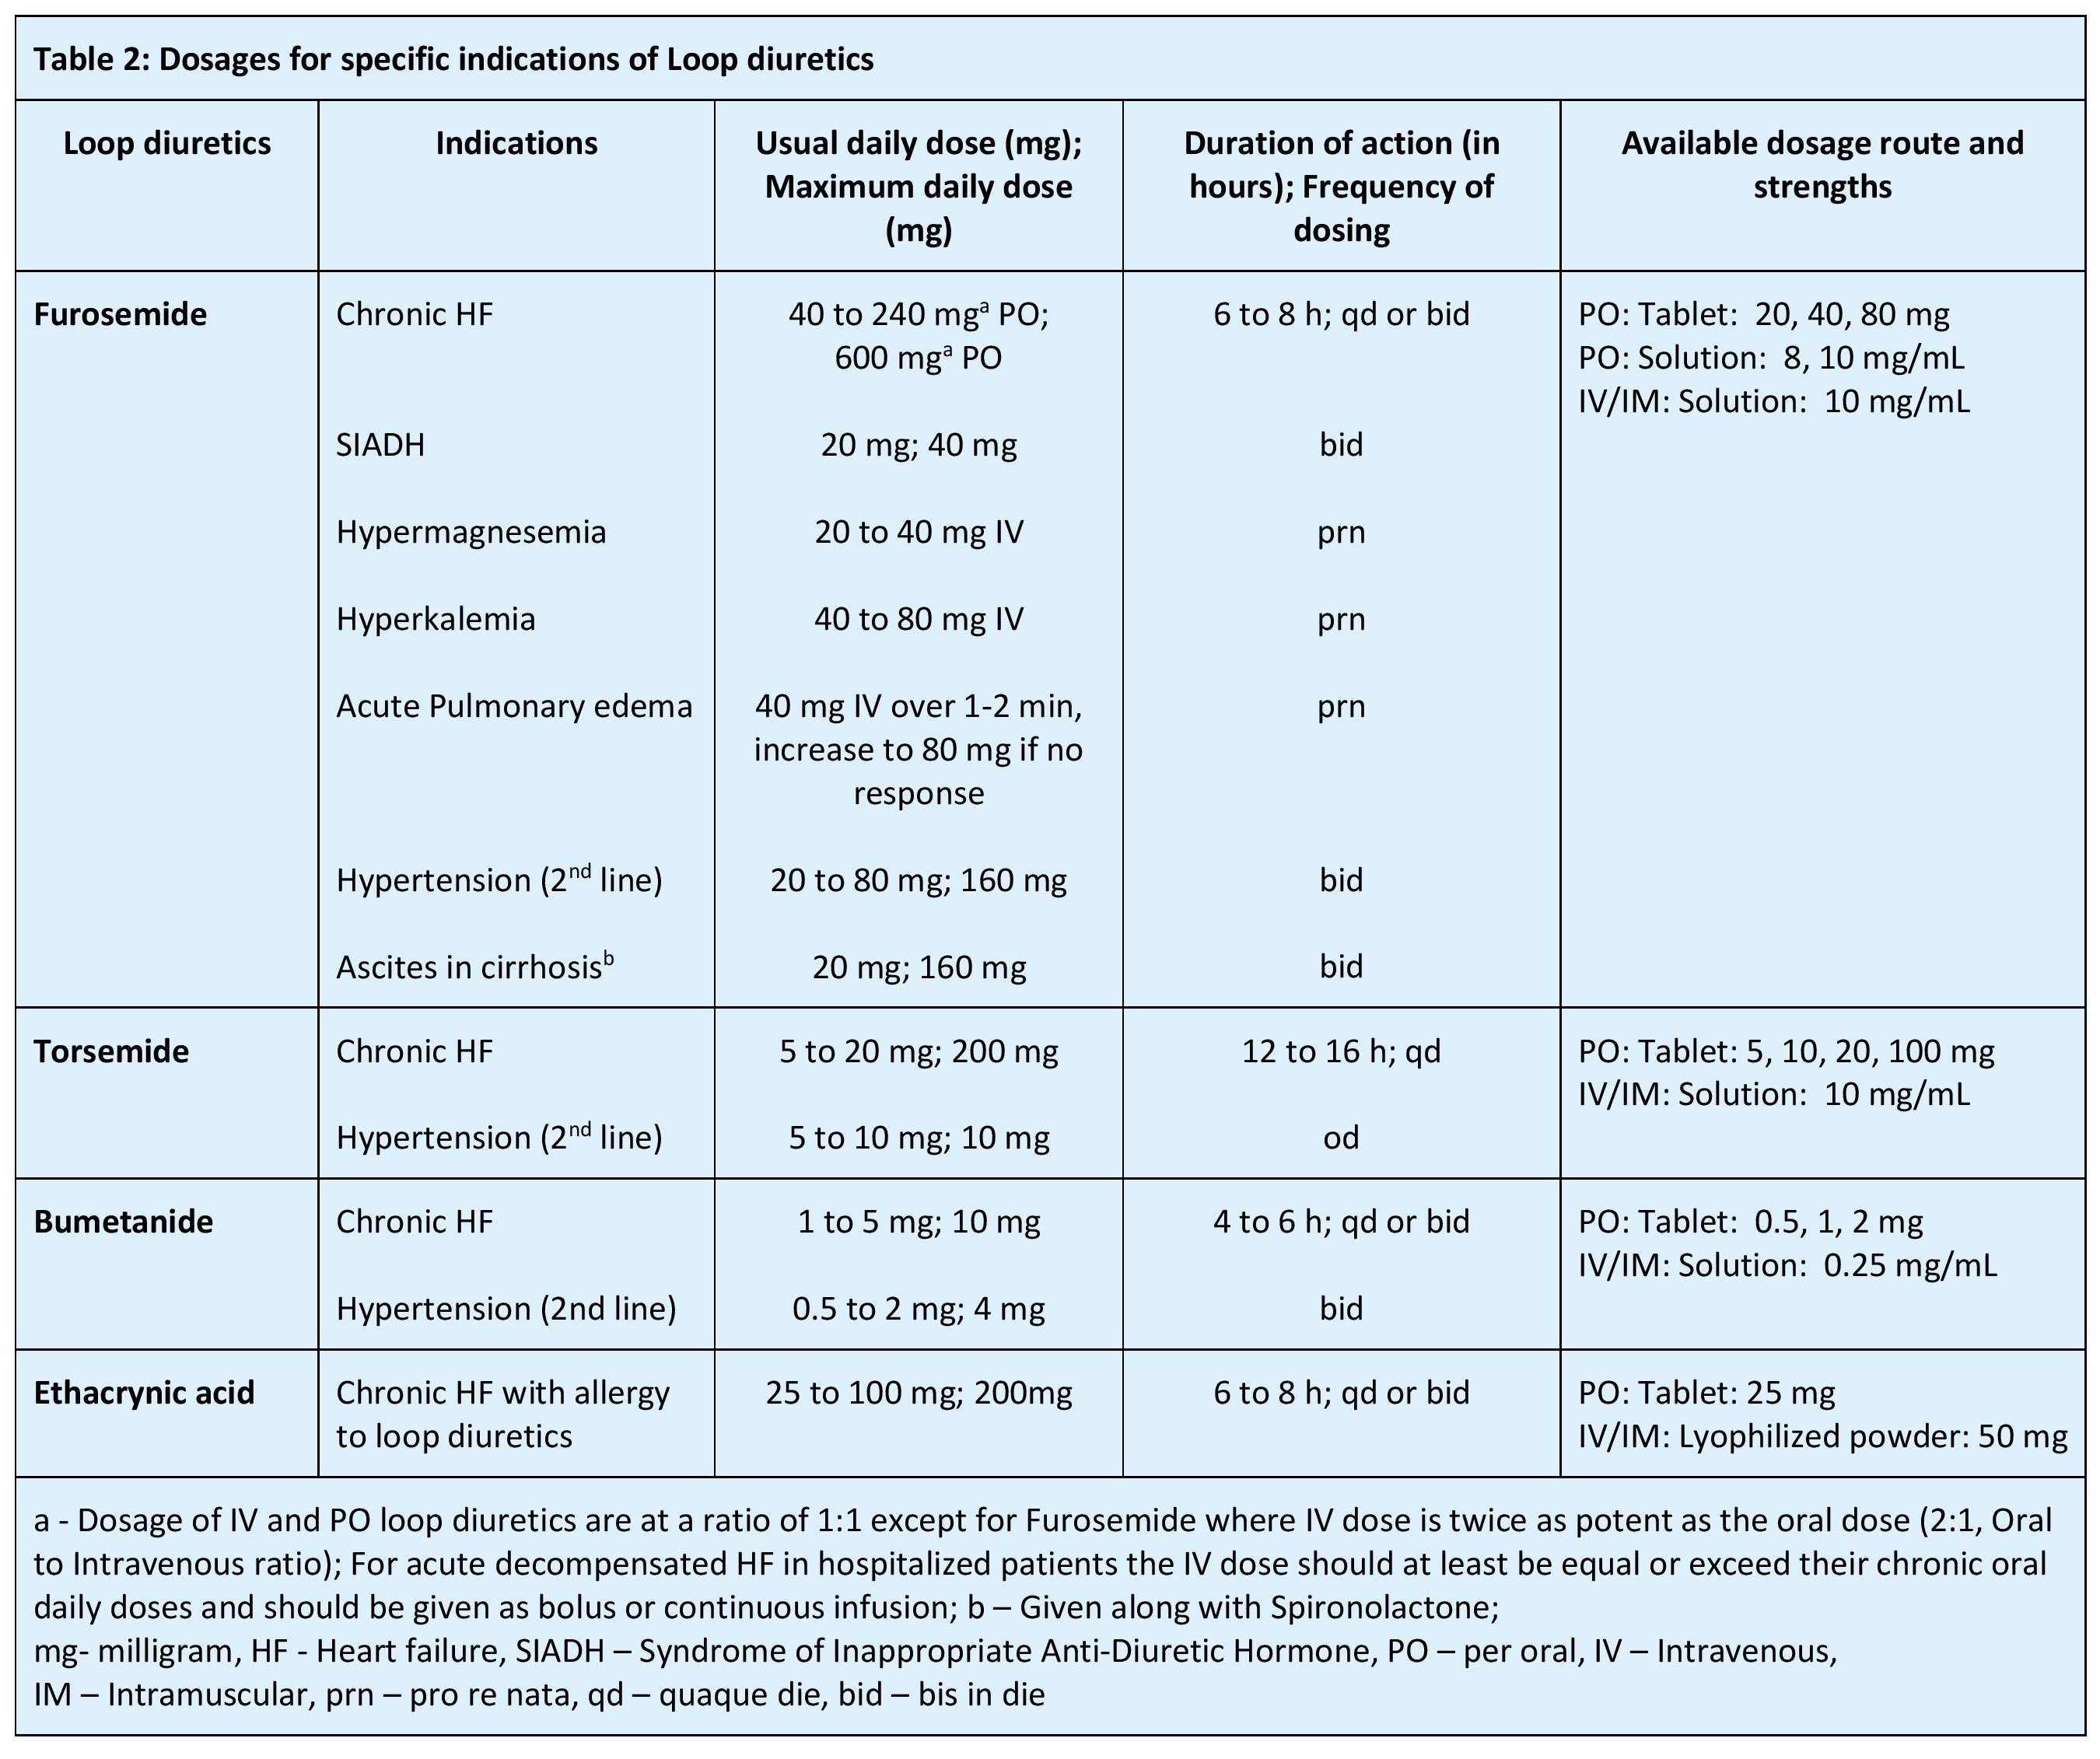 Table 2: Dosages for specific indications of Loop diuretics